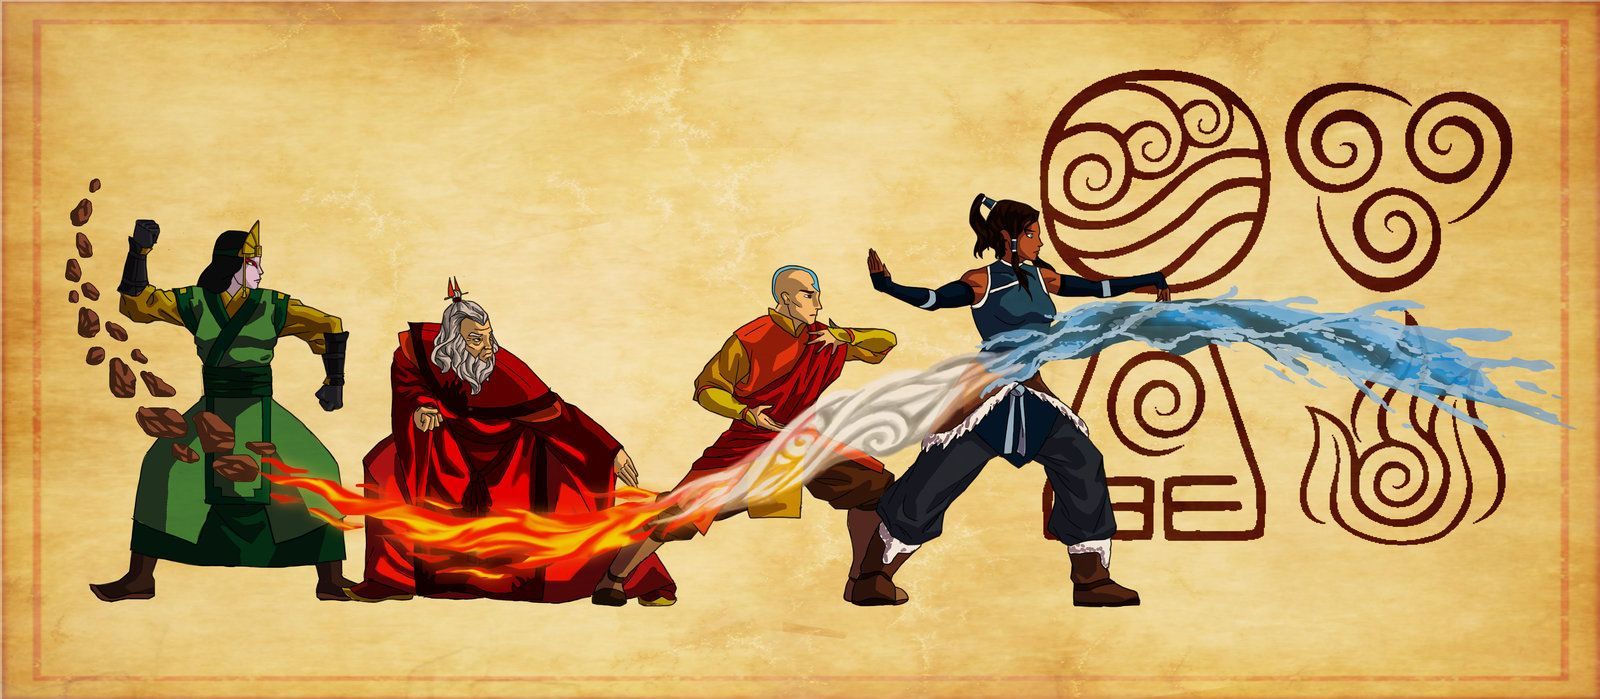 The Last Airbender Wallpapers on WallpaperDog